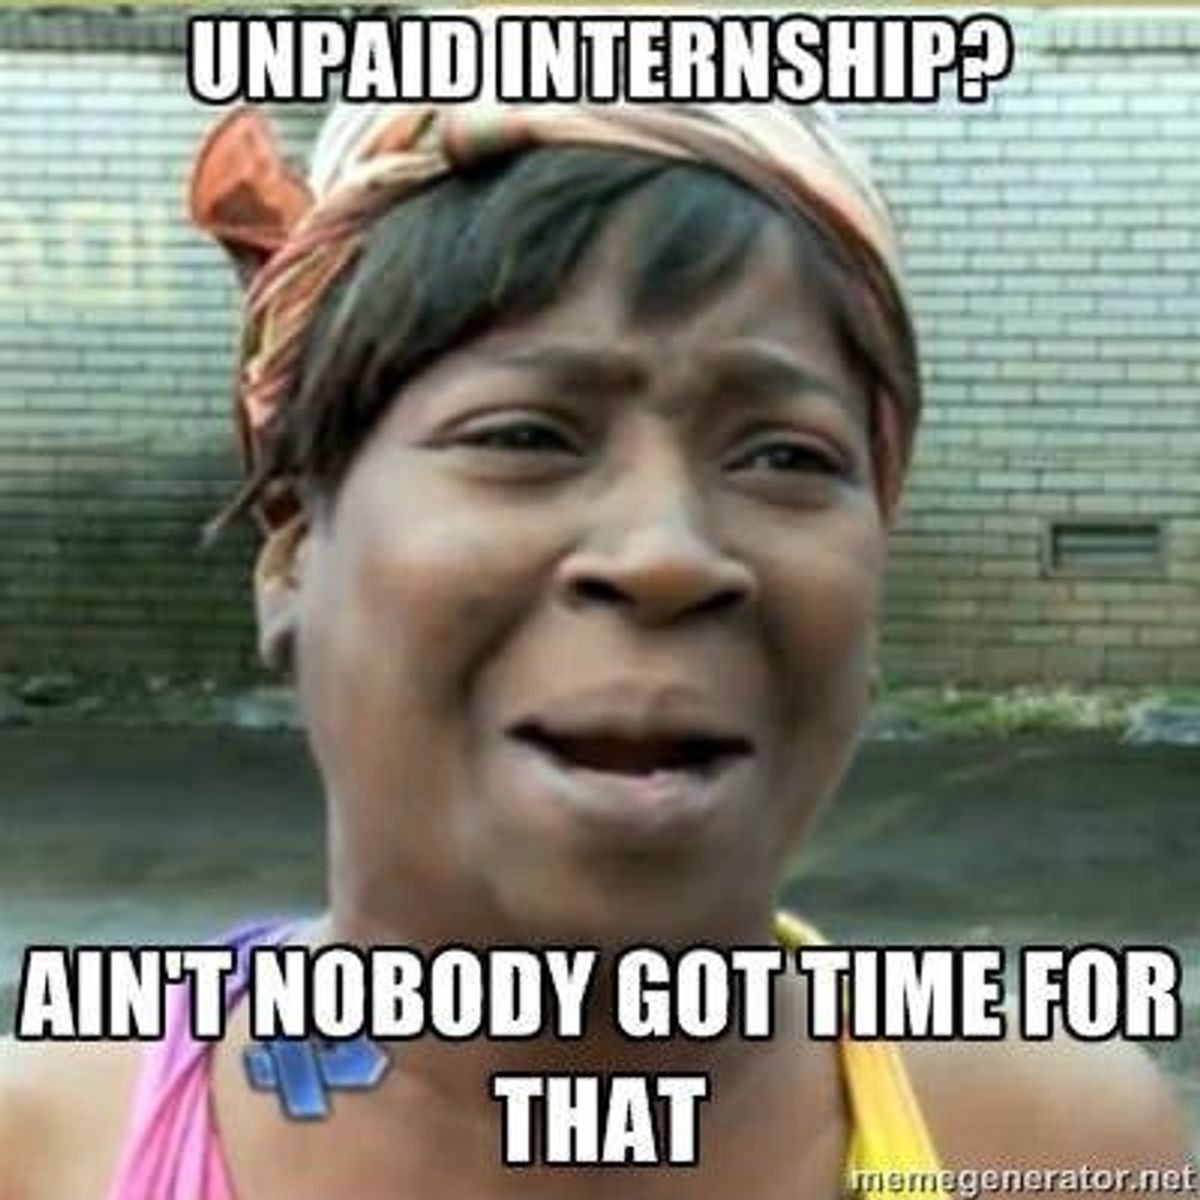 A College Student's Survivial Guide for Unpaid Summer Internships